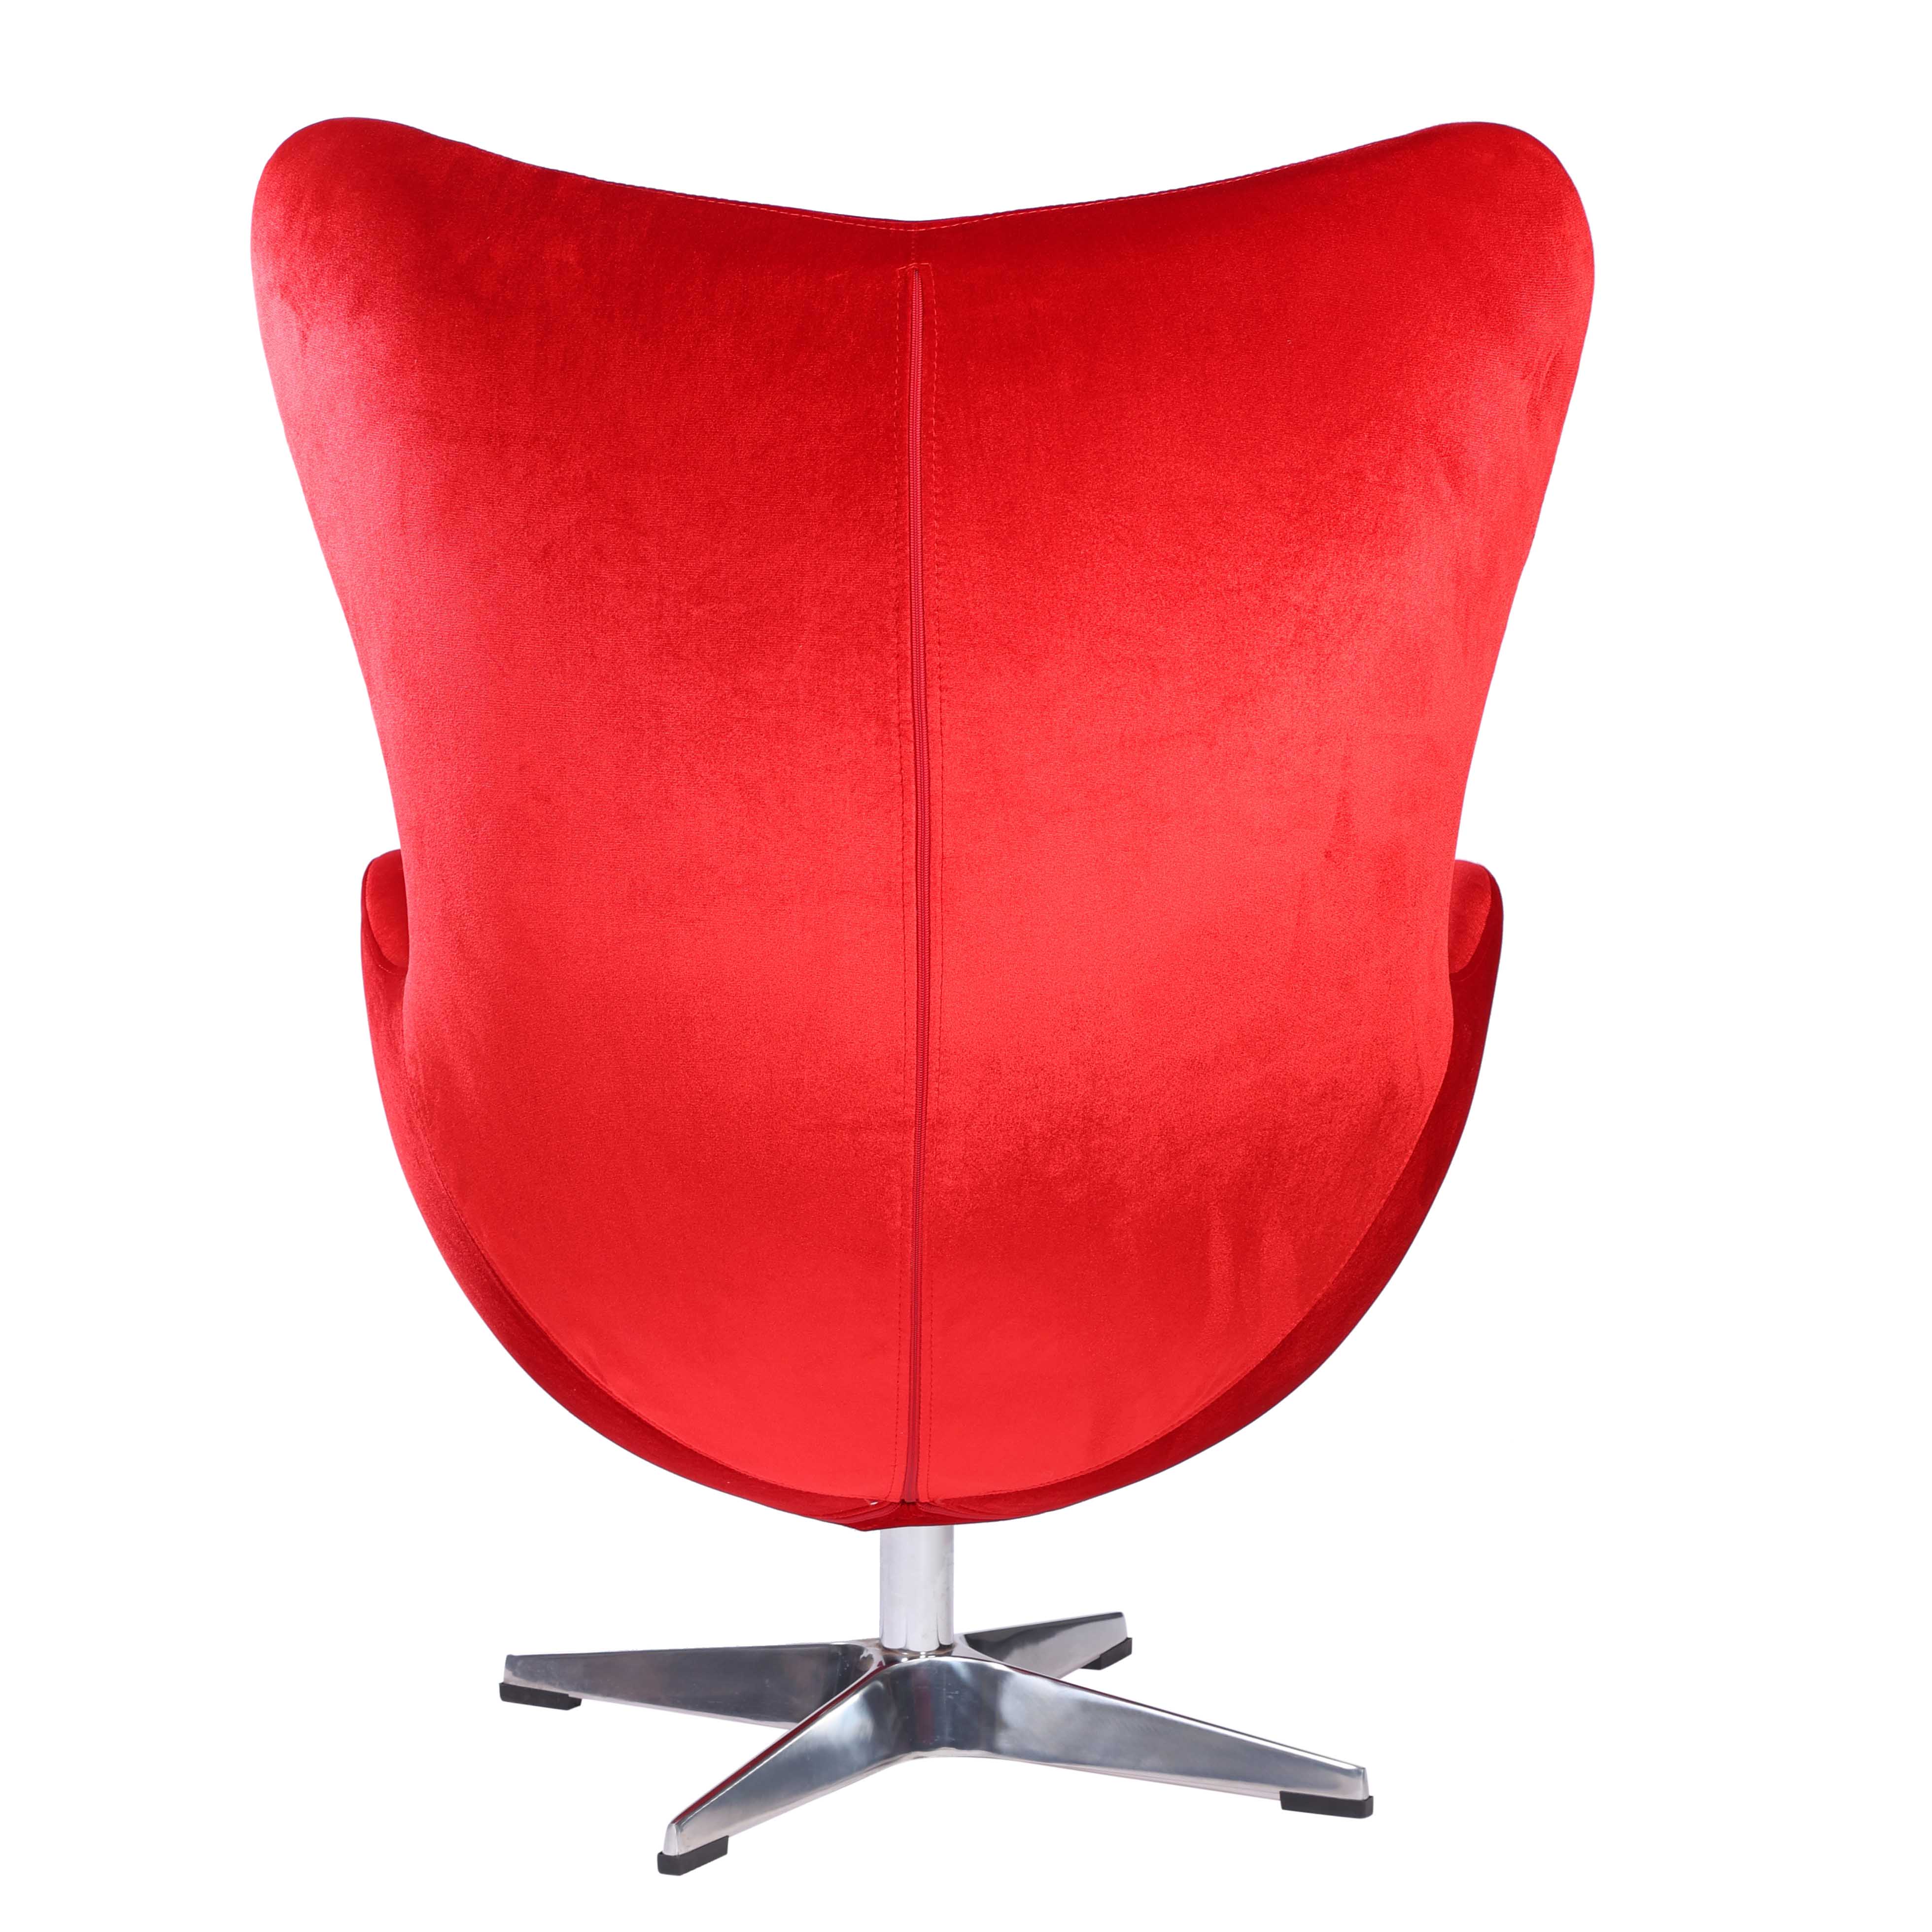 Vienna Velvet Upholstered Lounge Chair with Aluminium Base - Red